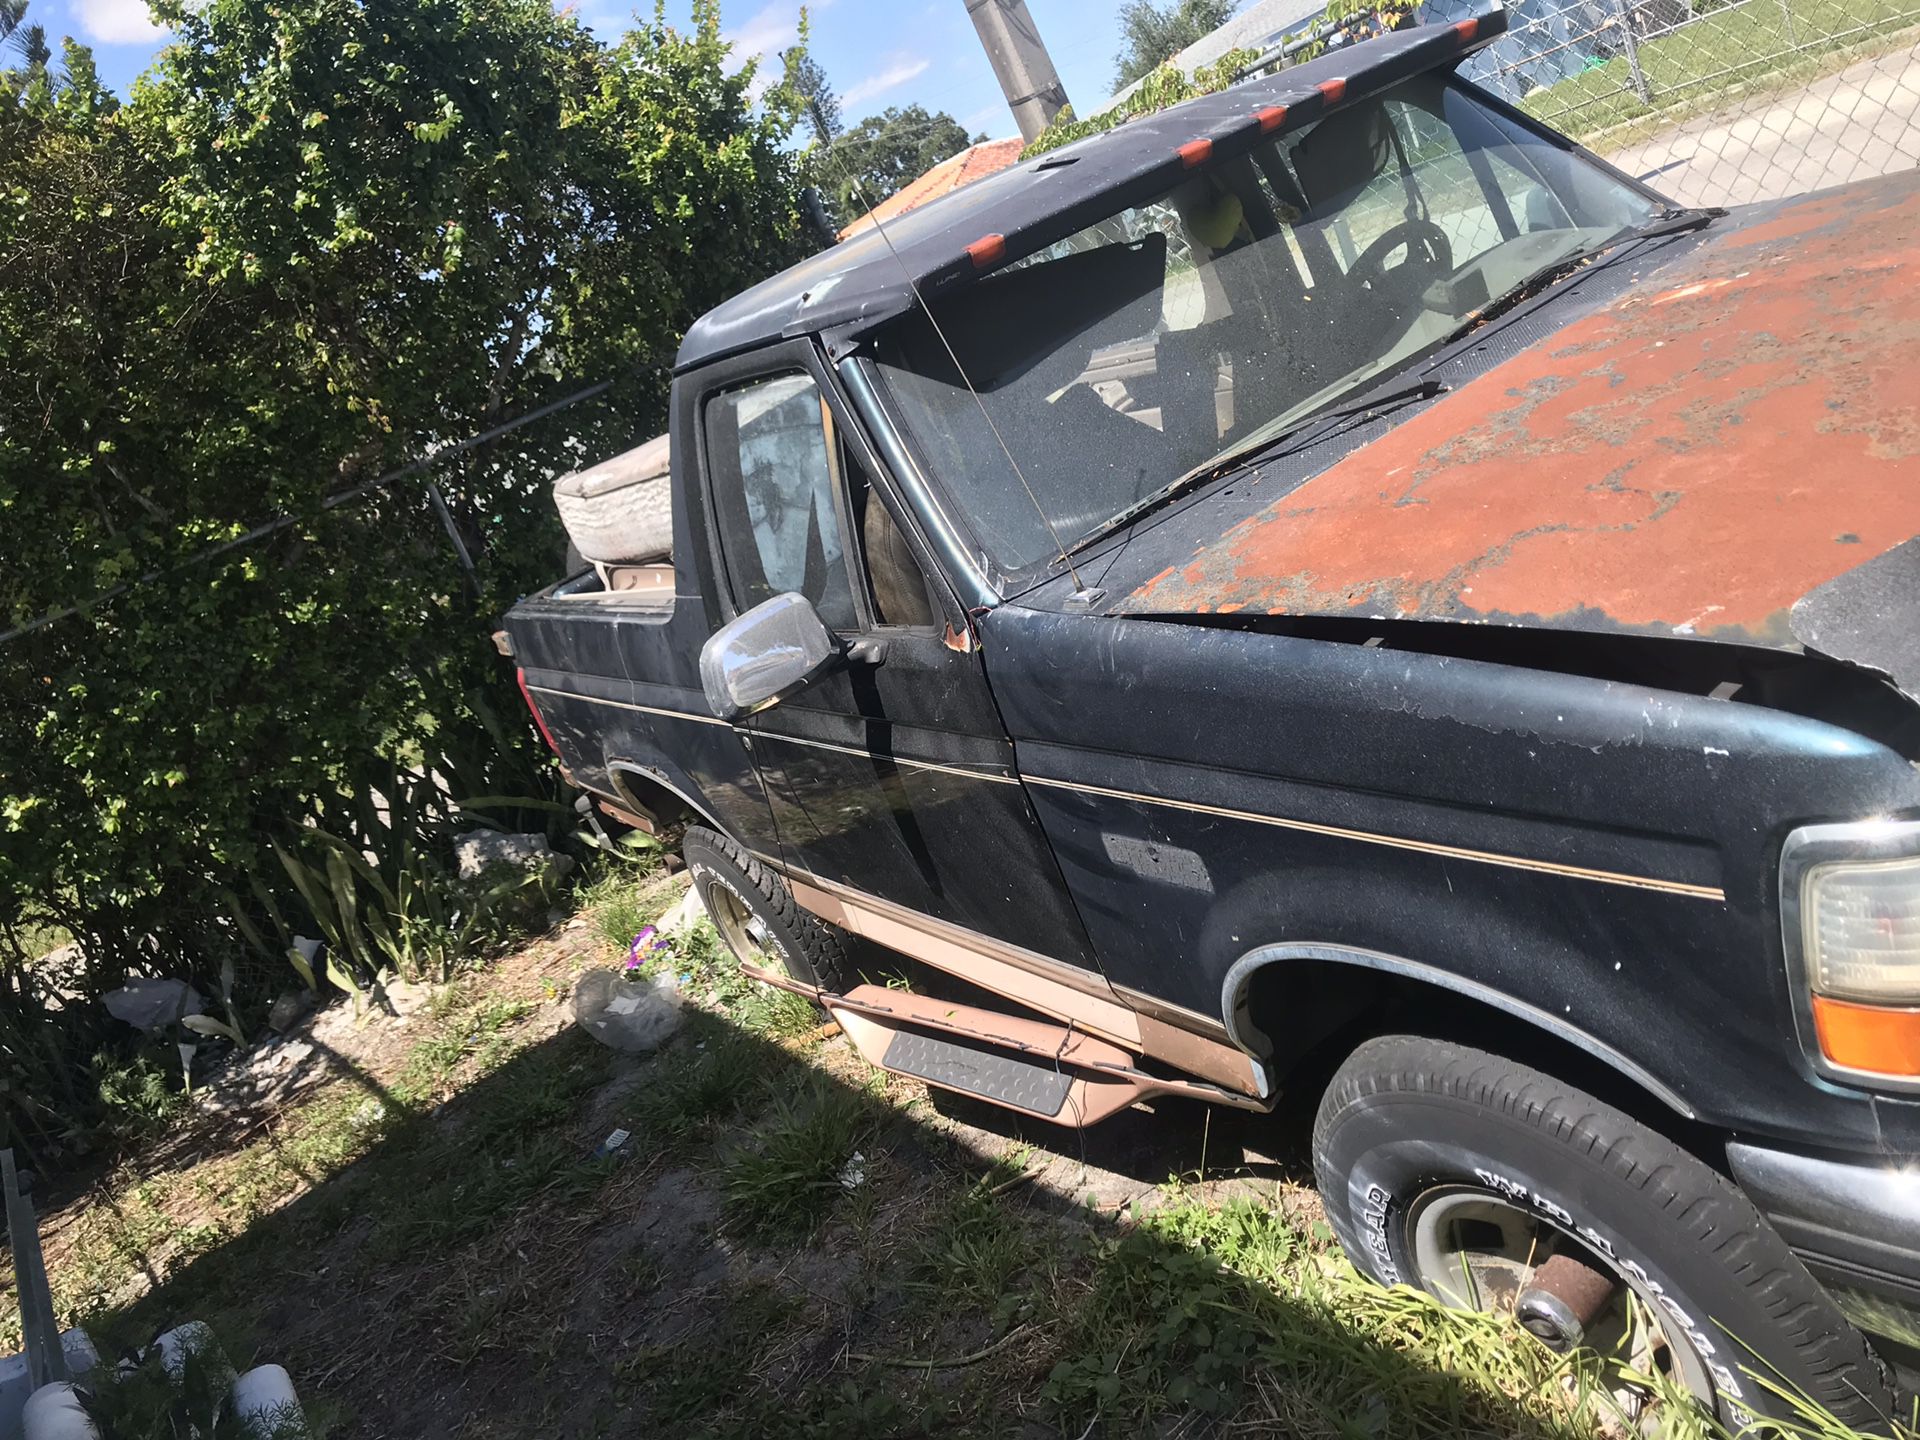 1996 Ford bronco parts good engine and transmission drain train